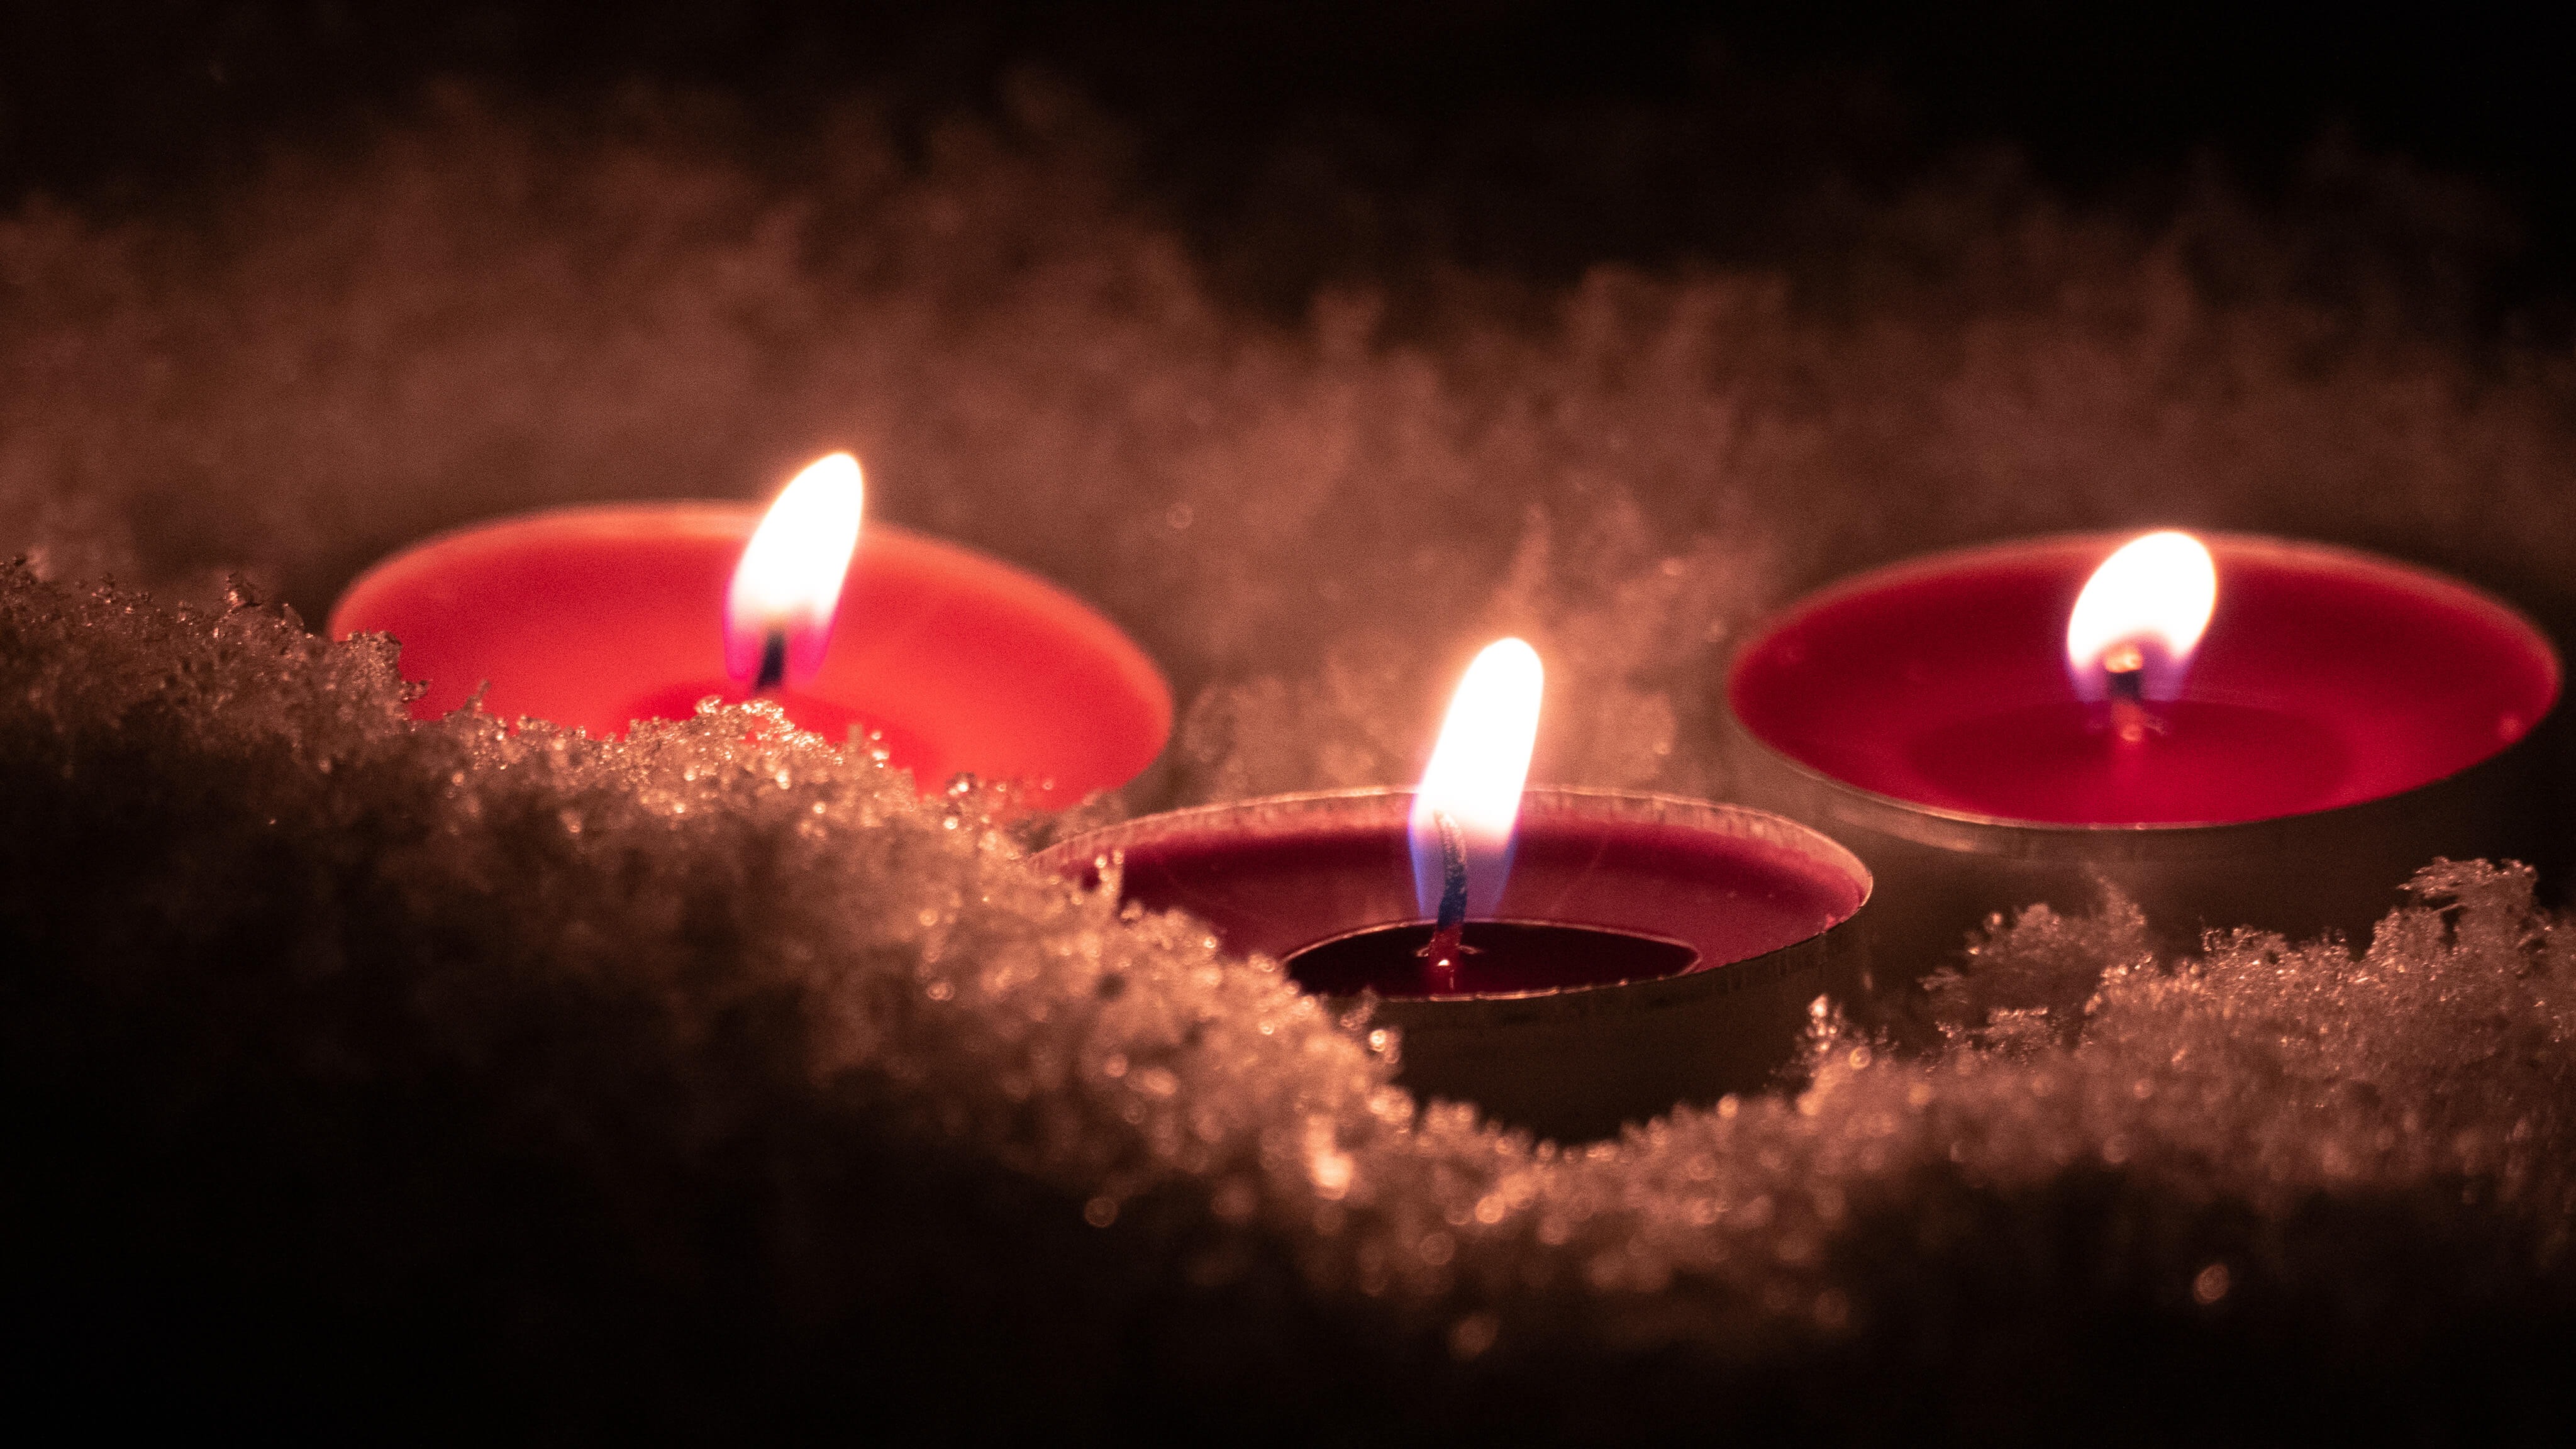 red tealights in snow